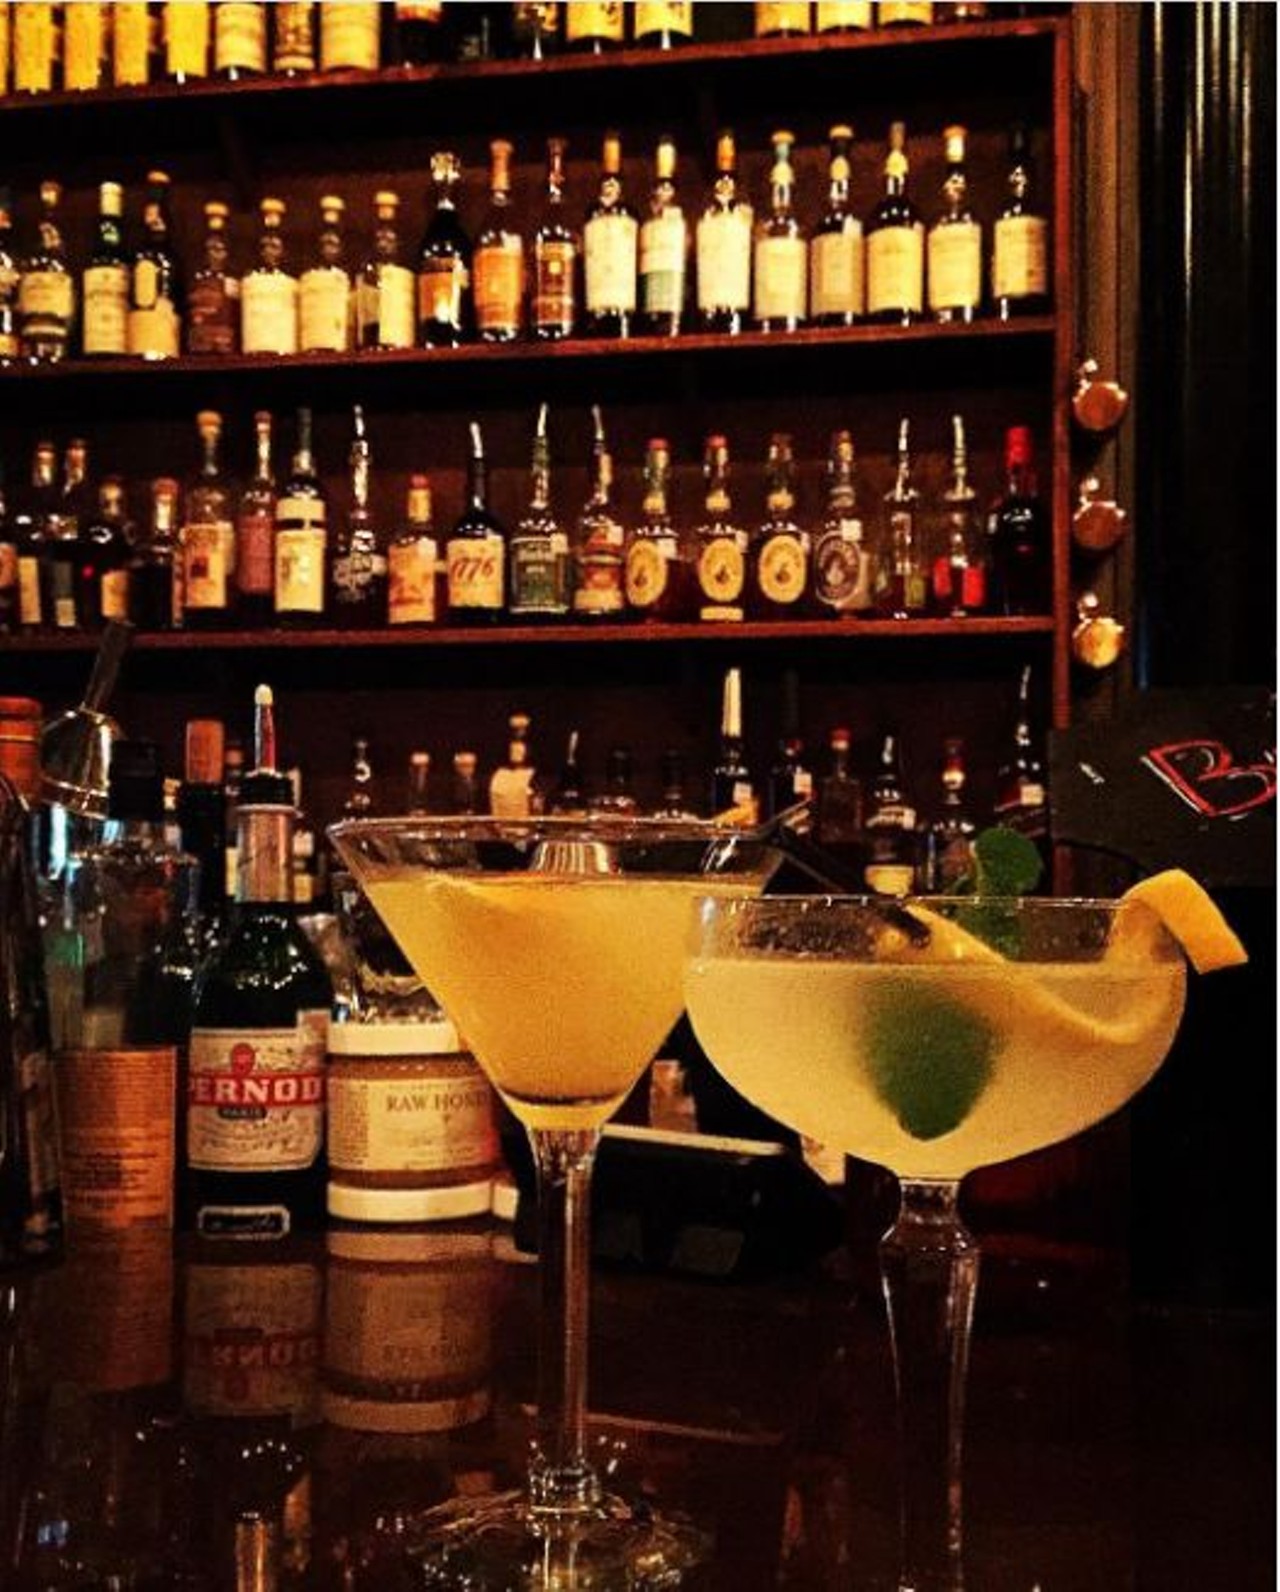 SoHo Wine & Martini Bar
214 W. Crockett St., (210) 444-1000 
One of the area&#146;s first cocktail bars still packs in &#145;tini aficionados to the downtown area. 
Photo via Instagram,  meredith_p14